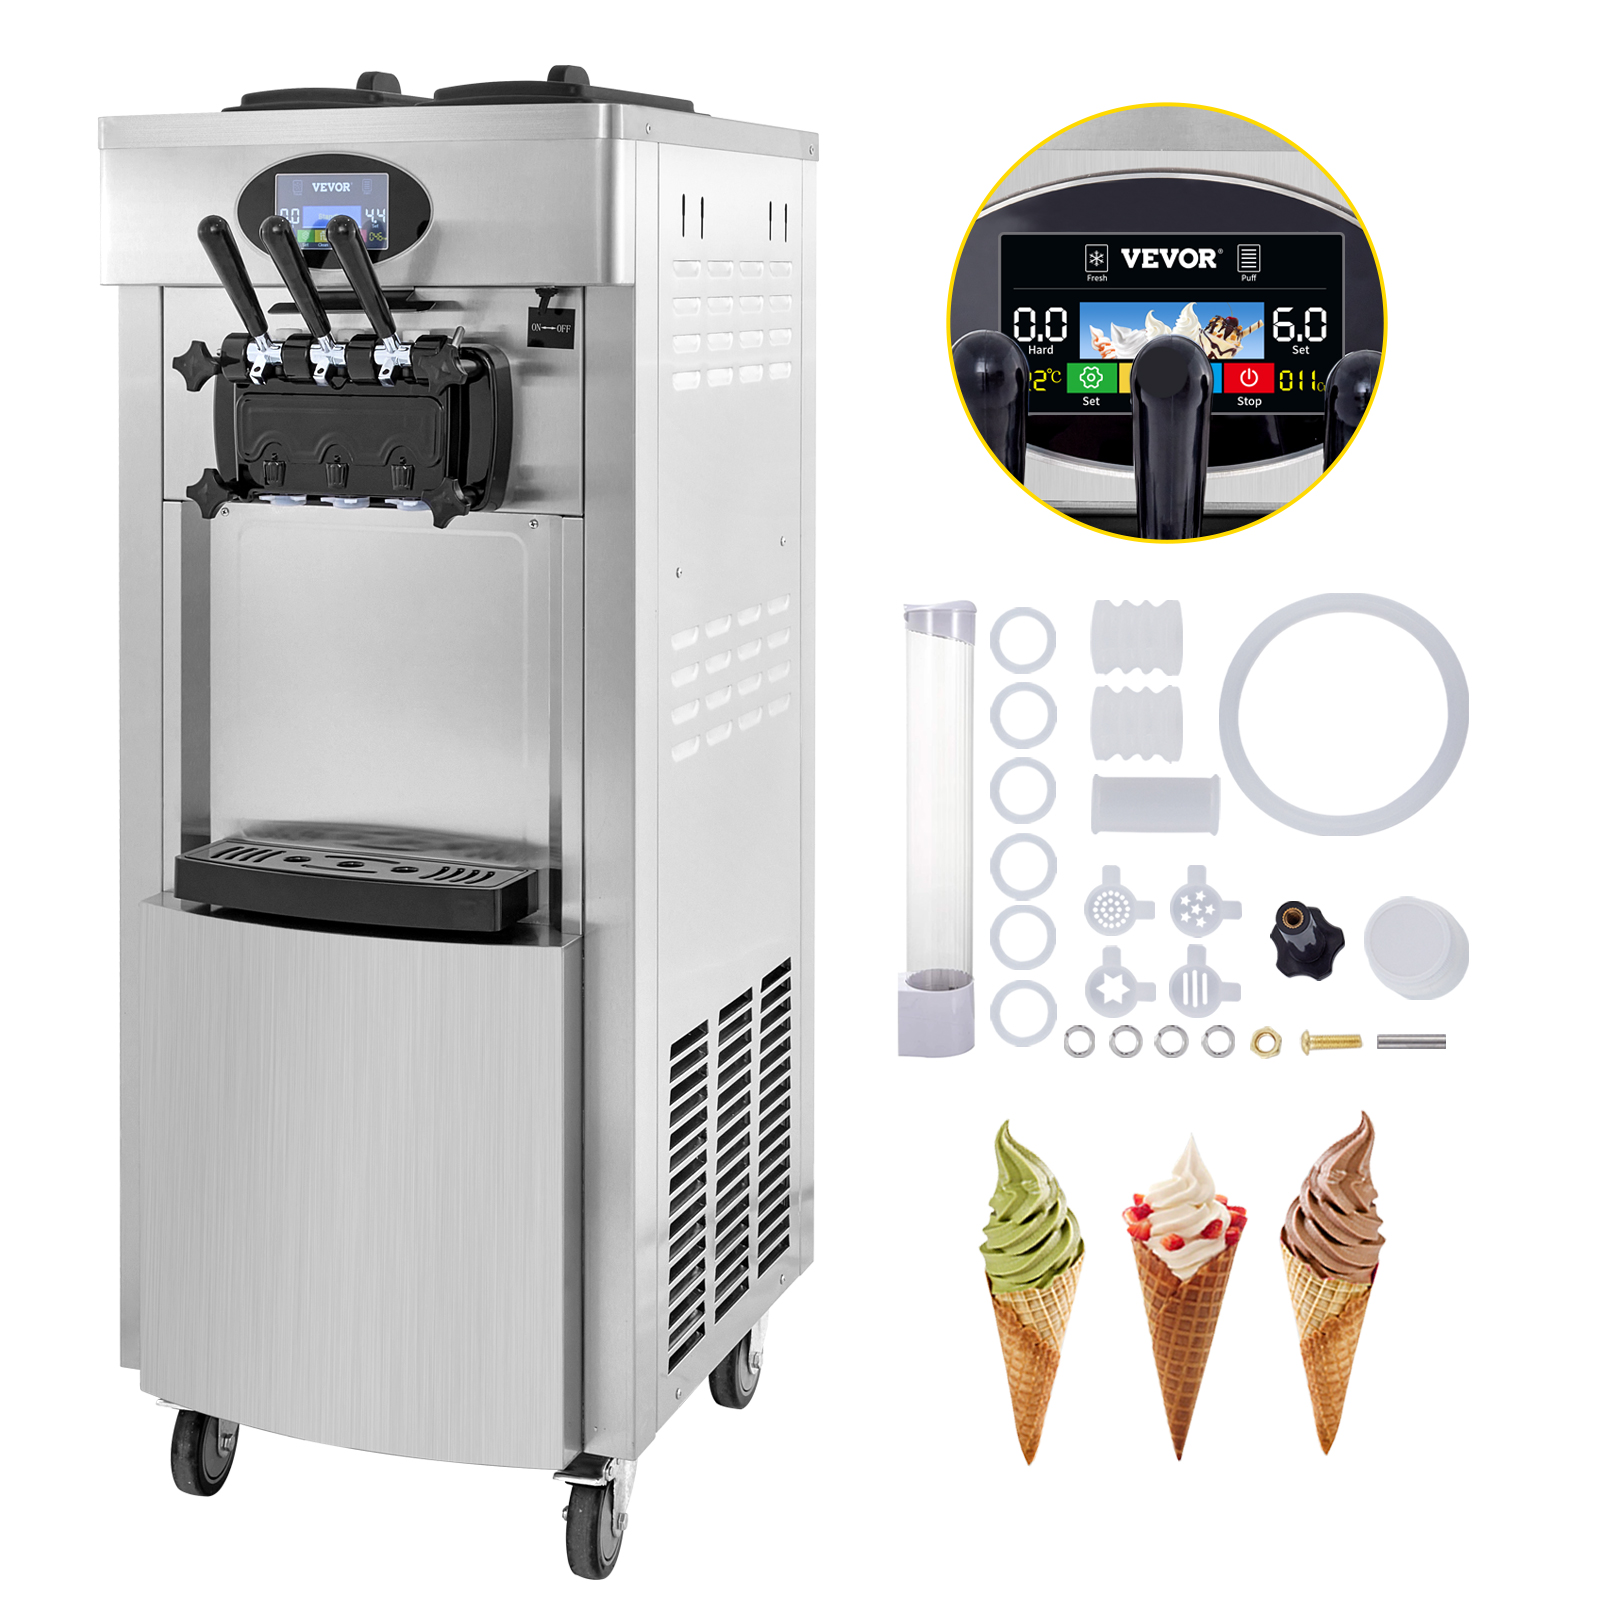 VEVOR 2200W Commercial Soft Ice Cream Machine 3 Flavors 5.3 to 7.4Gallon per Hour PreCooling at Night Auto Clean LCD Panel for Restaurants Snack Bar, Sliver | VEVOR